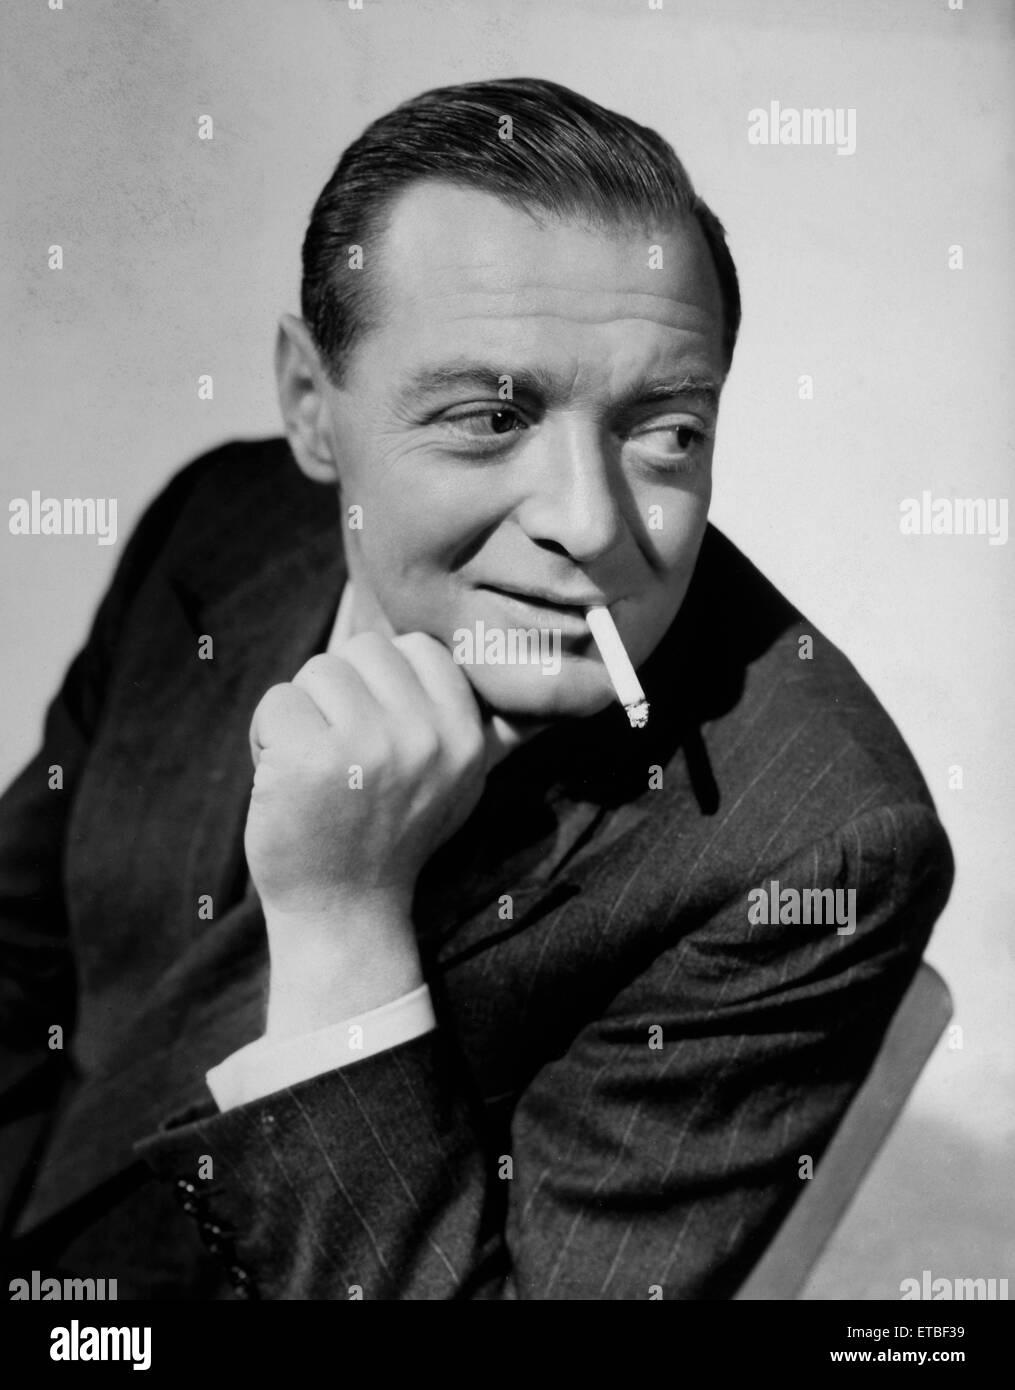 Peter Lorre, Portrait from the Film 'Three Strangers', 1946 Stock Photo